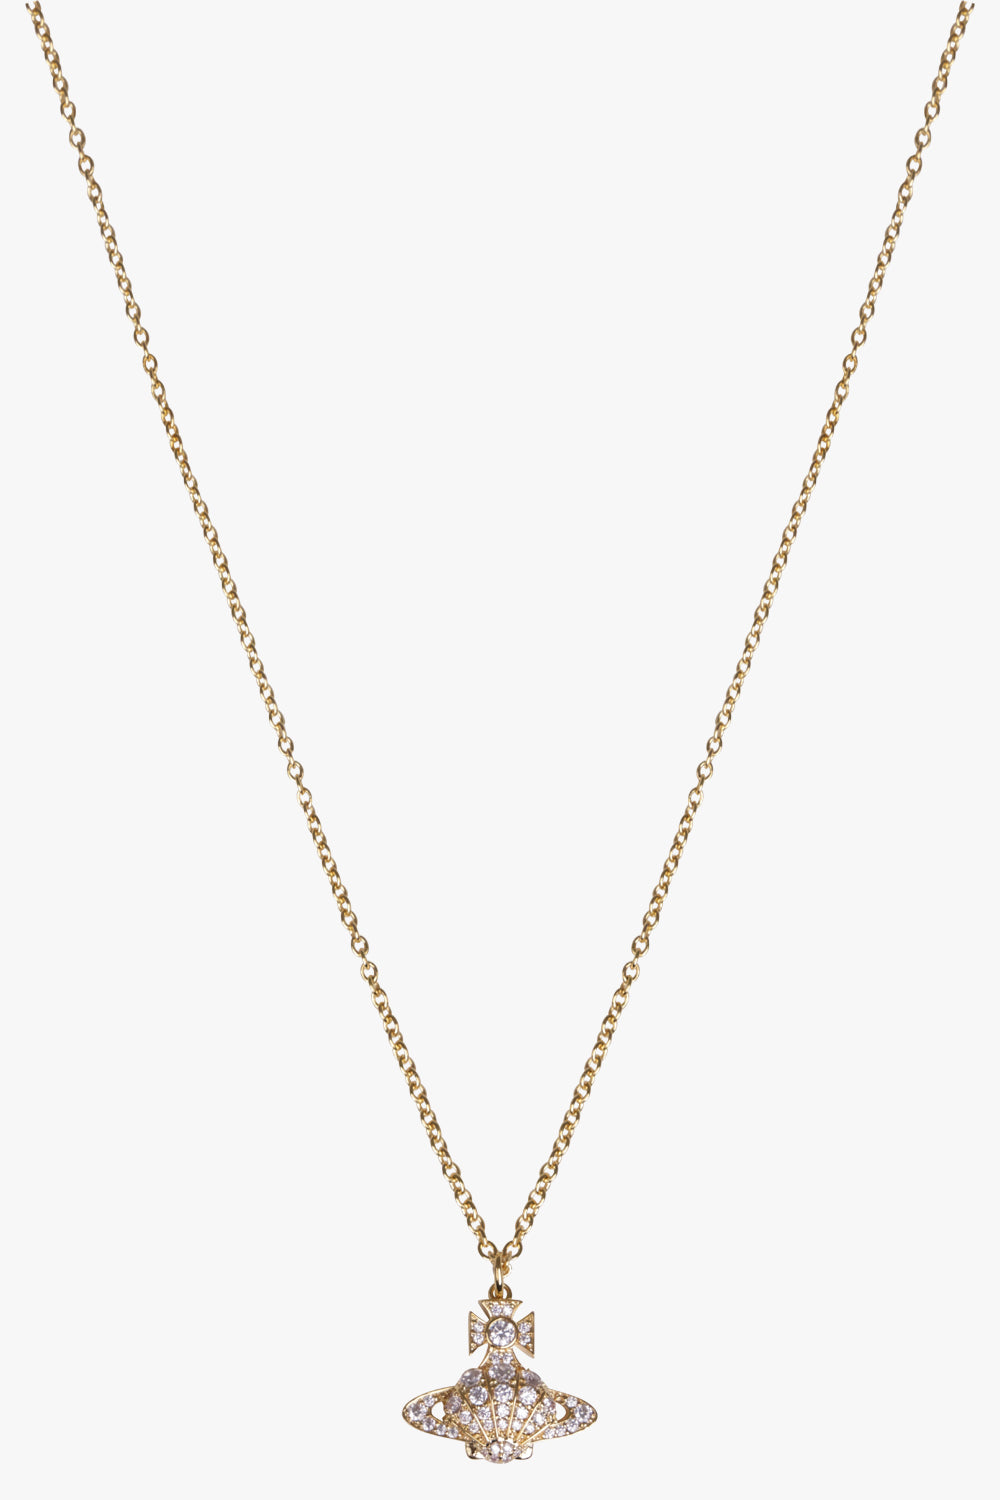 VIVIENNE WESTWOOD JEWELLRY GOLD / GOLD NATALINA ORB PENDANT | GOLD